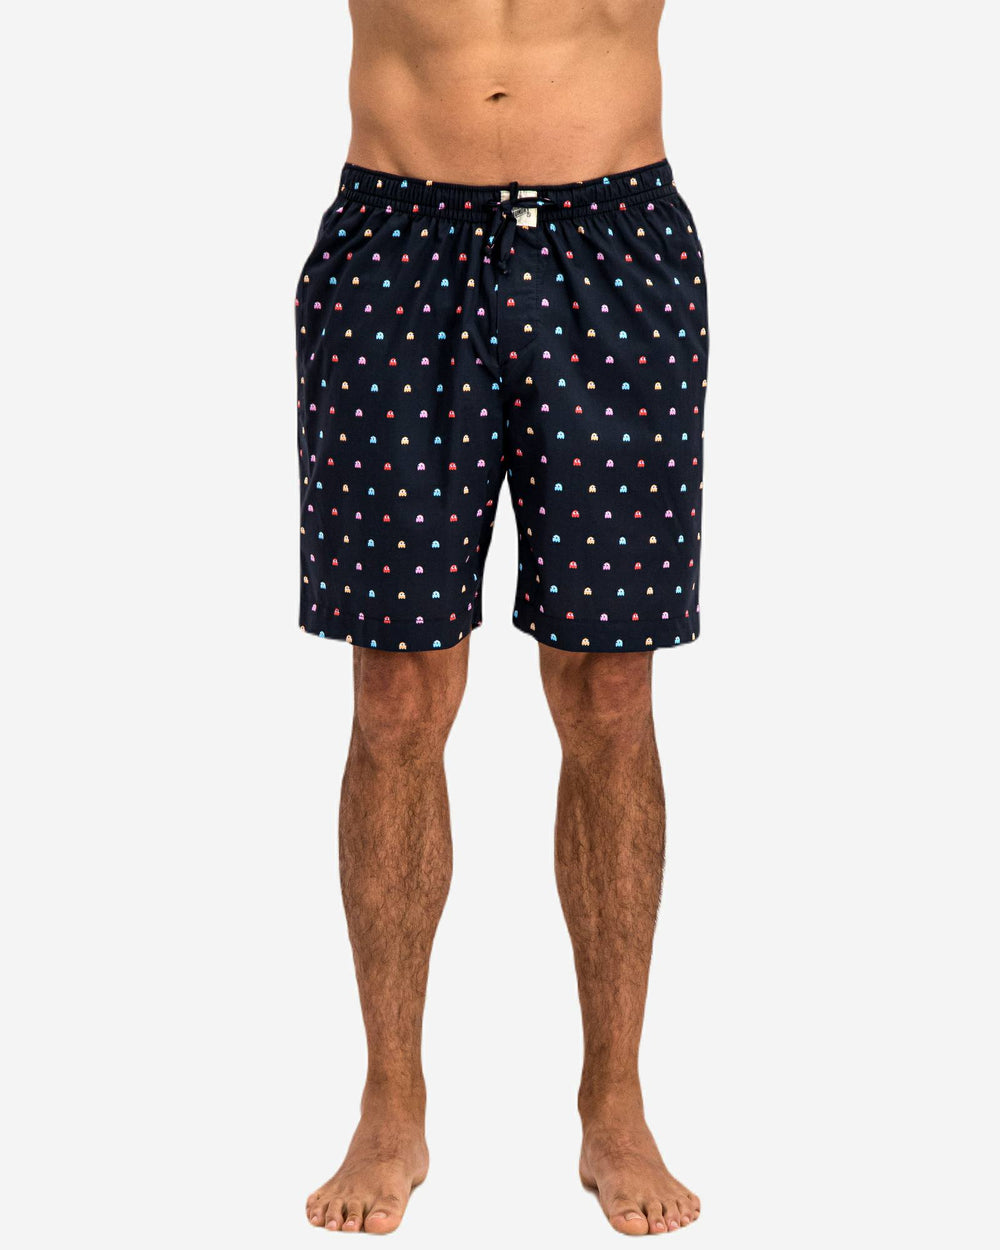 Mens lounge shorts with a p-ghost pacman pattern